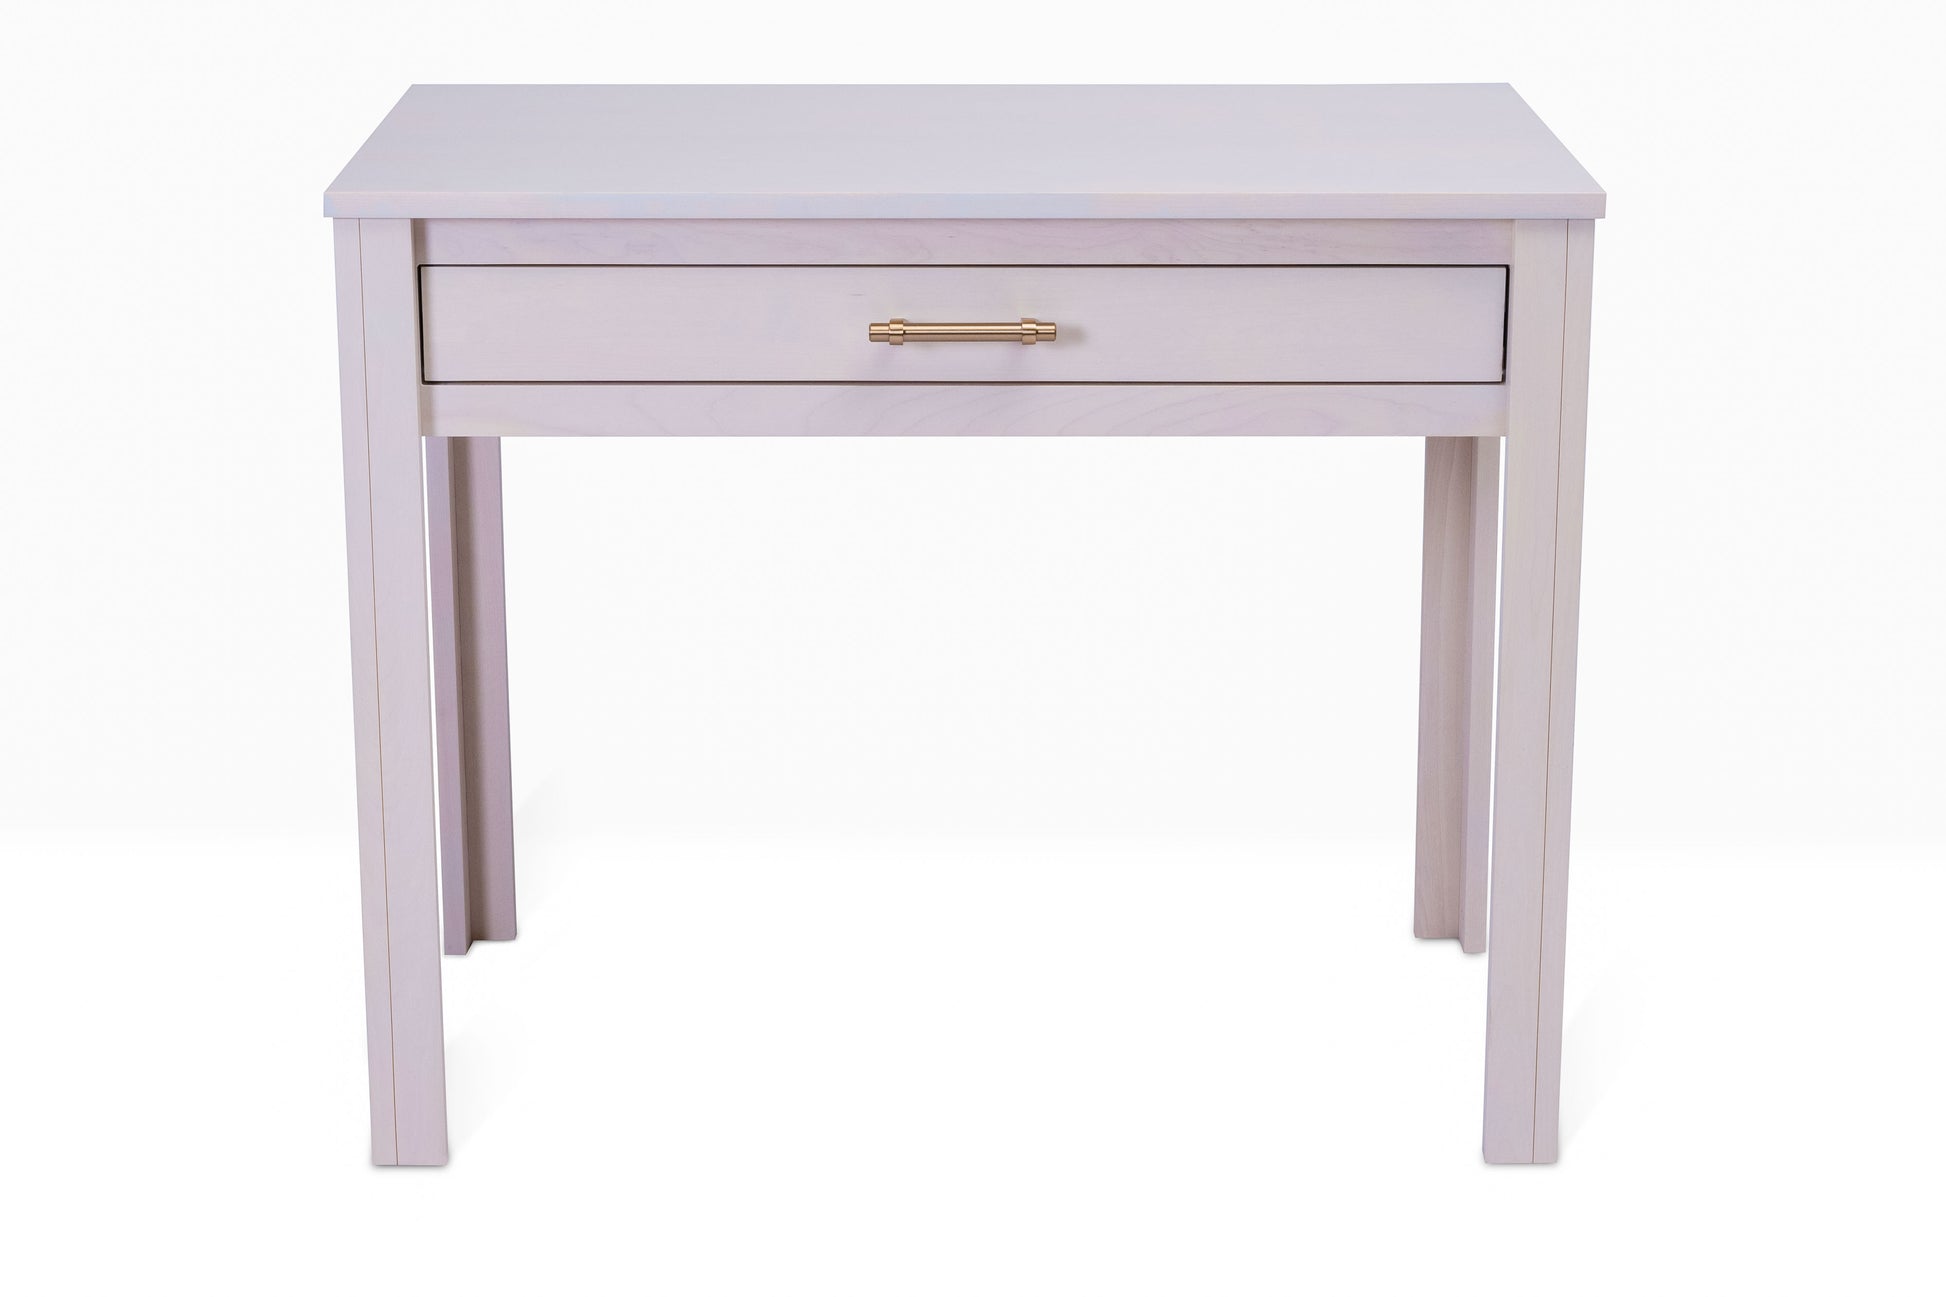 Acadia Tremont Writing Desk, shown with one drawer in Sandstone finish.